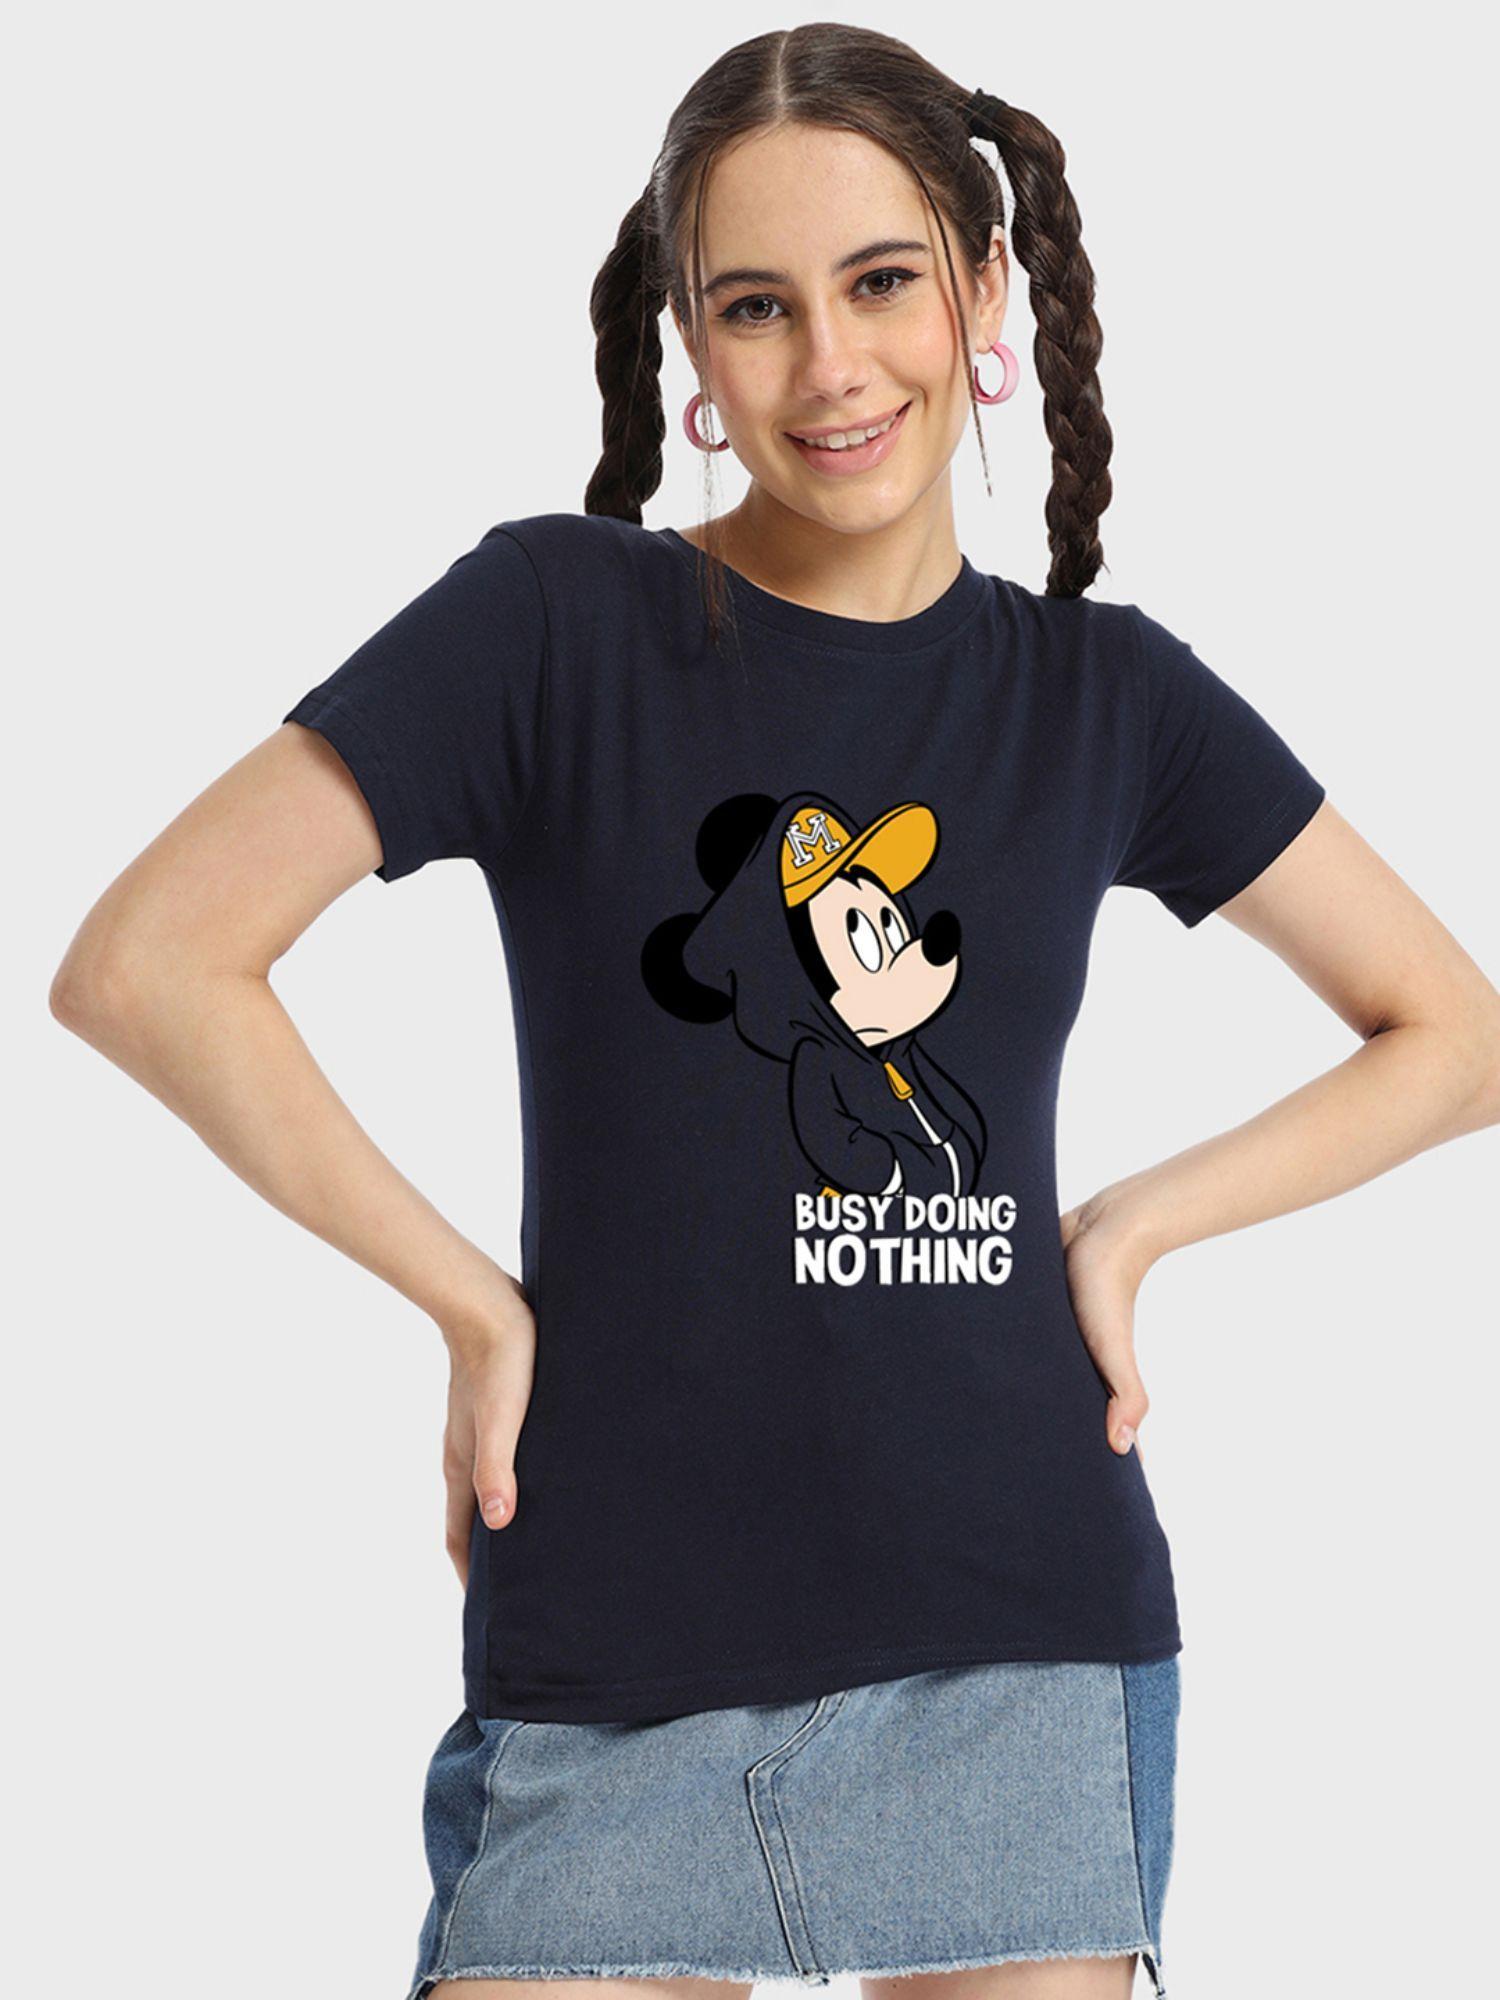 x official disney merchandise blue busy doing nothing graphic t-shirt